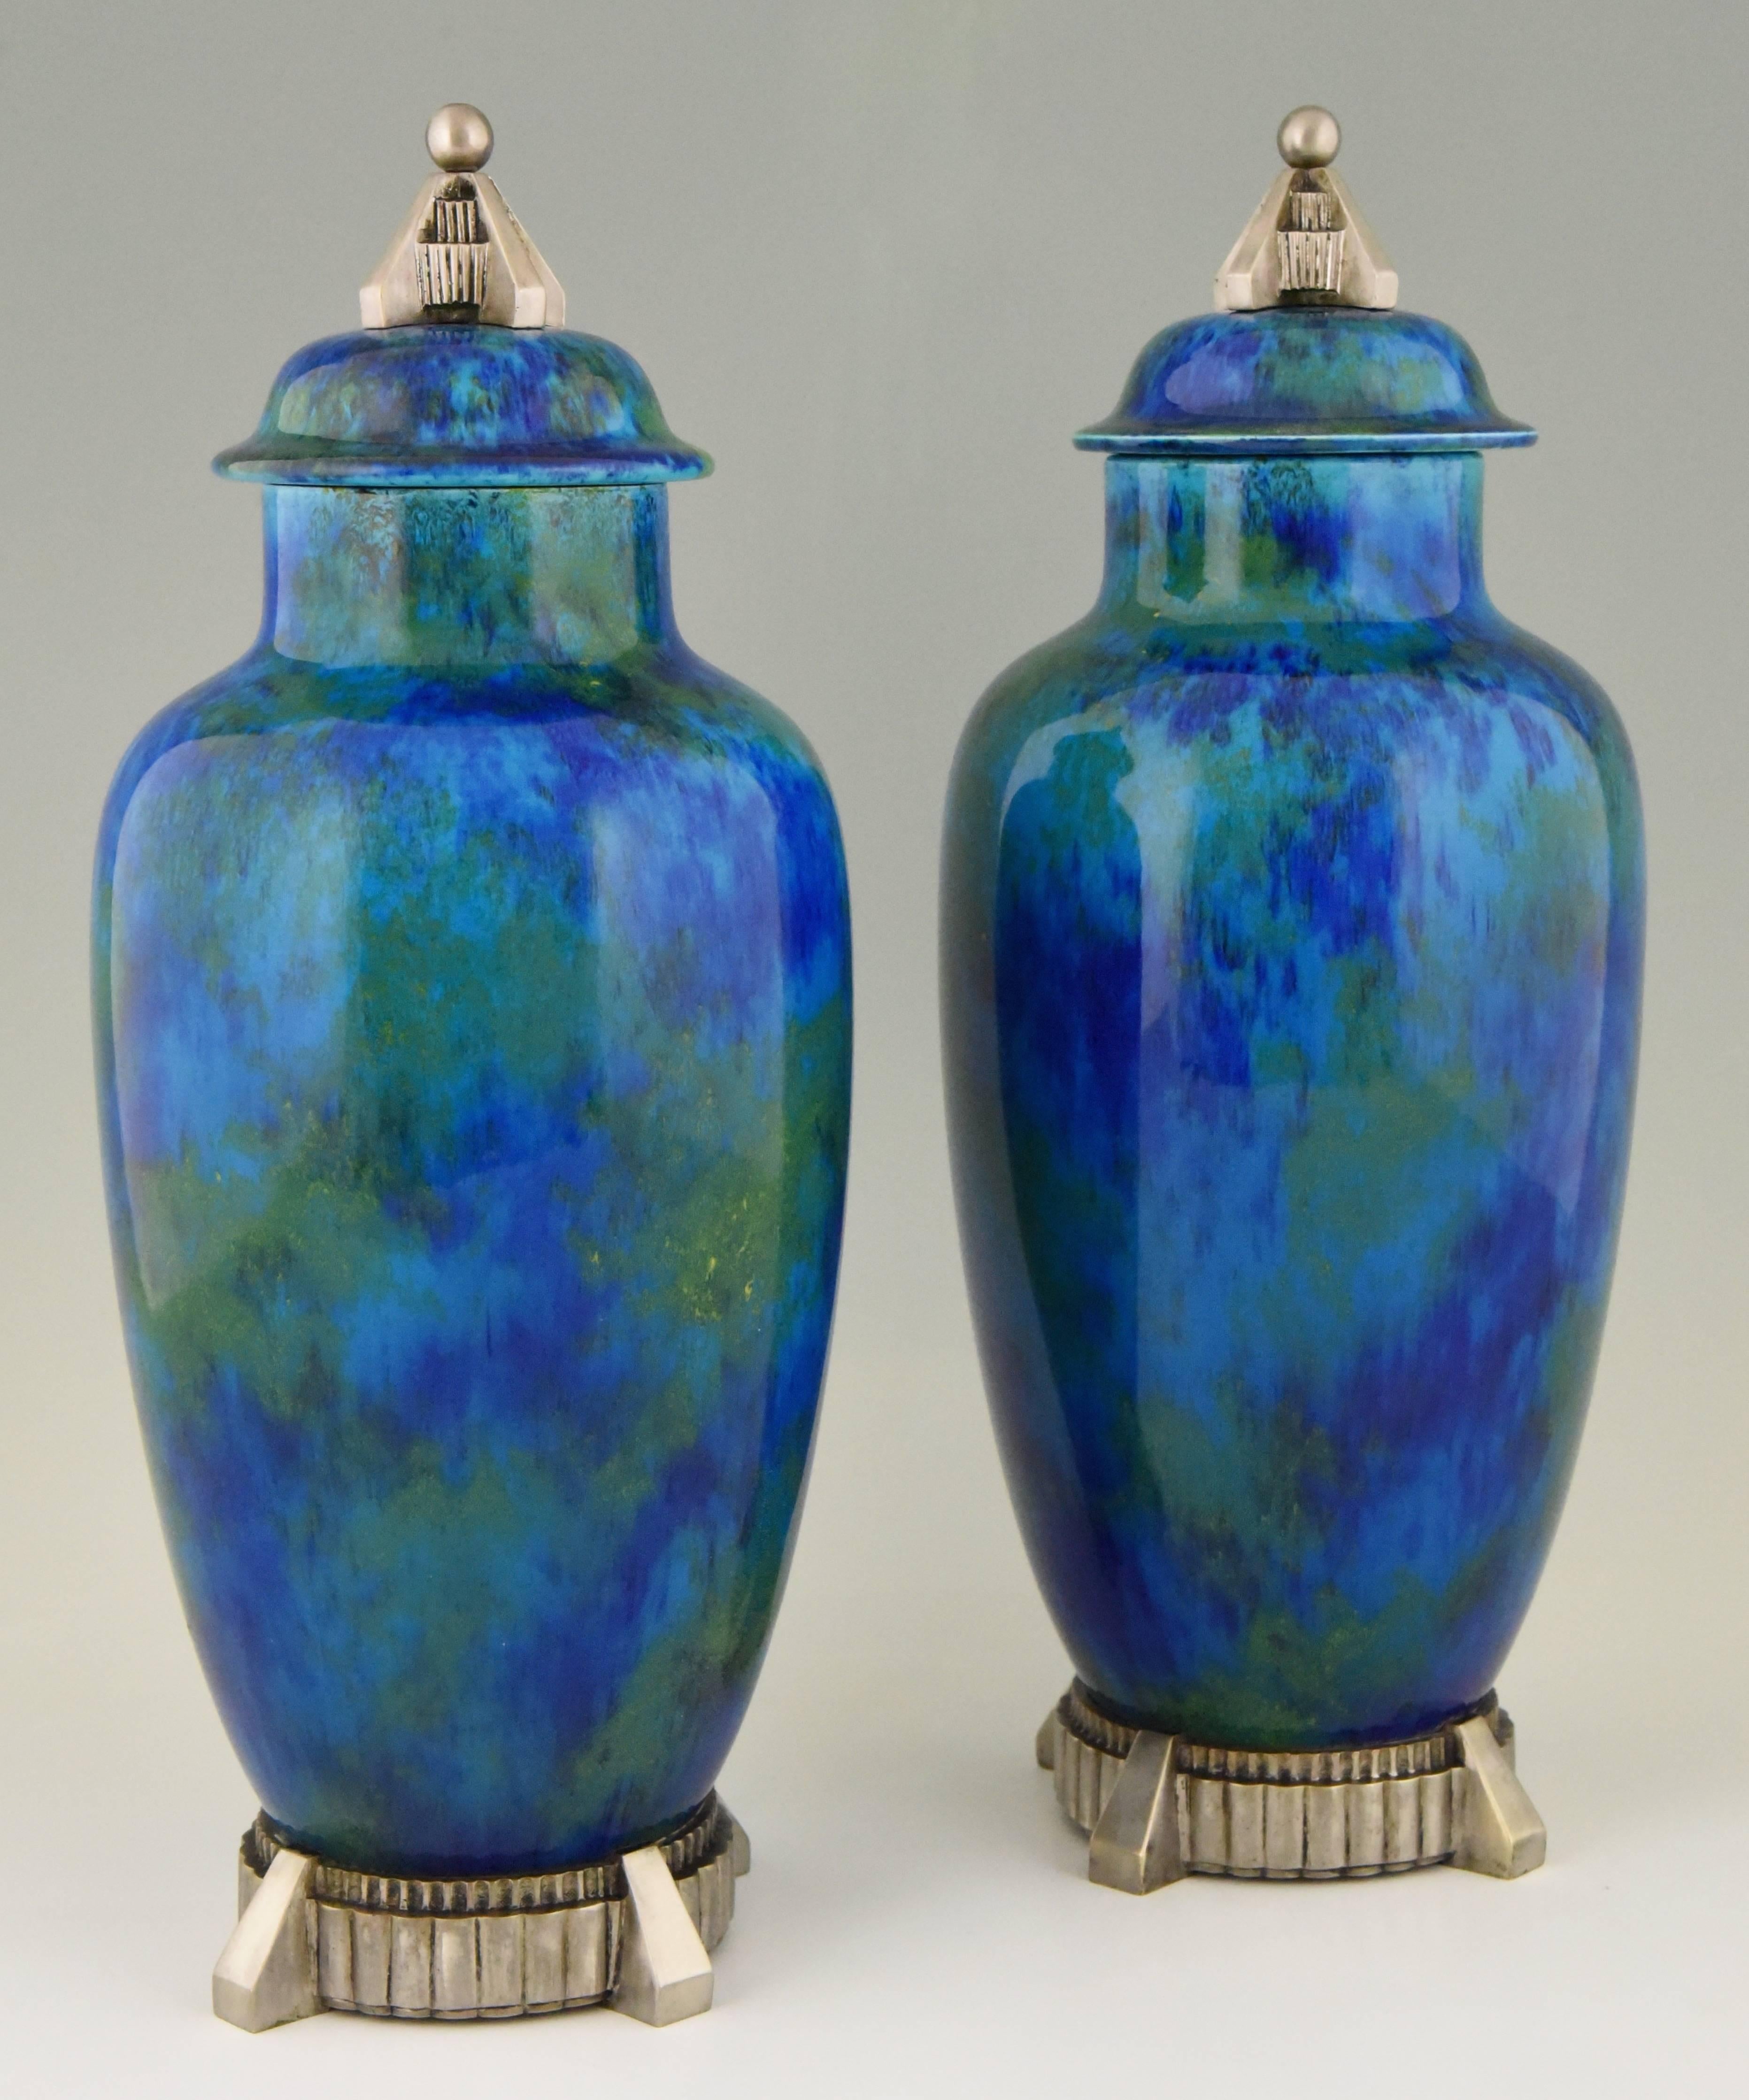 A beautiful pair of Art Deco ceramic vases or urns with blue glaze with bronze silvered decorations. The vases are created by Paul Milet for Sèvres, France 1925
 